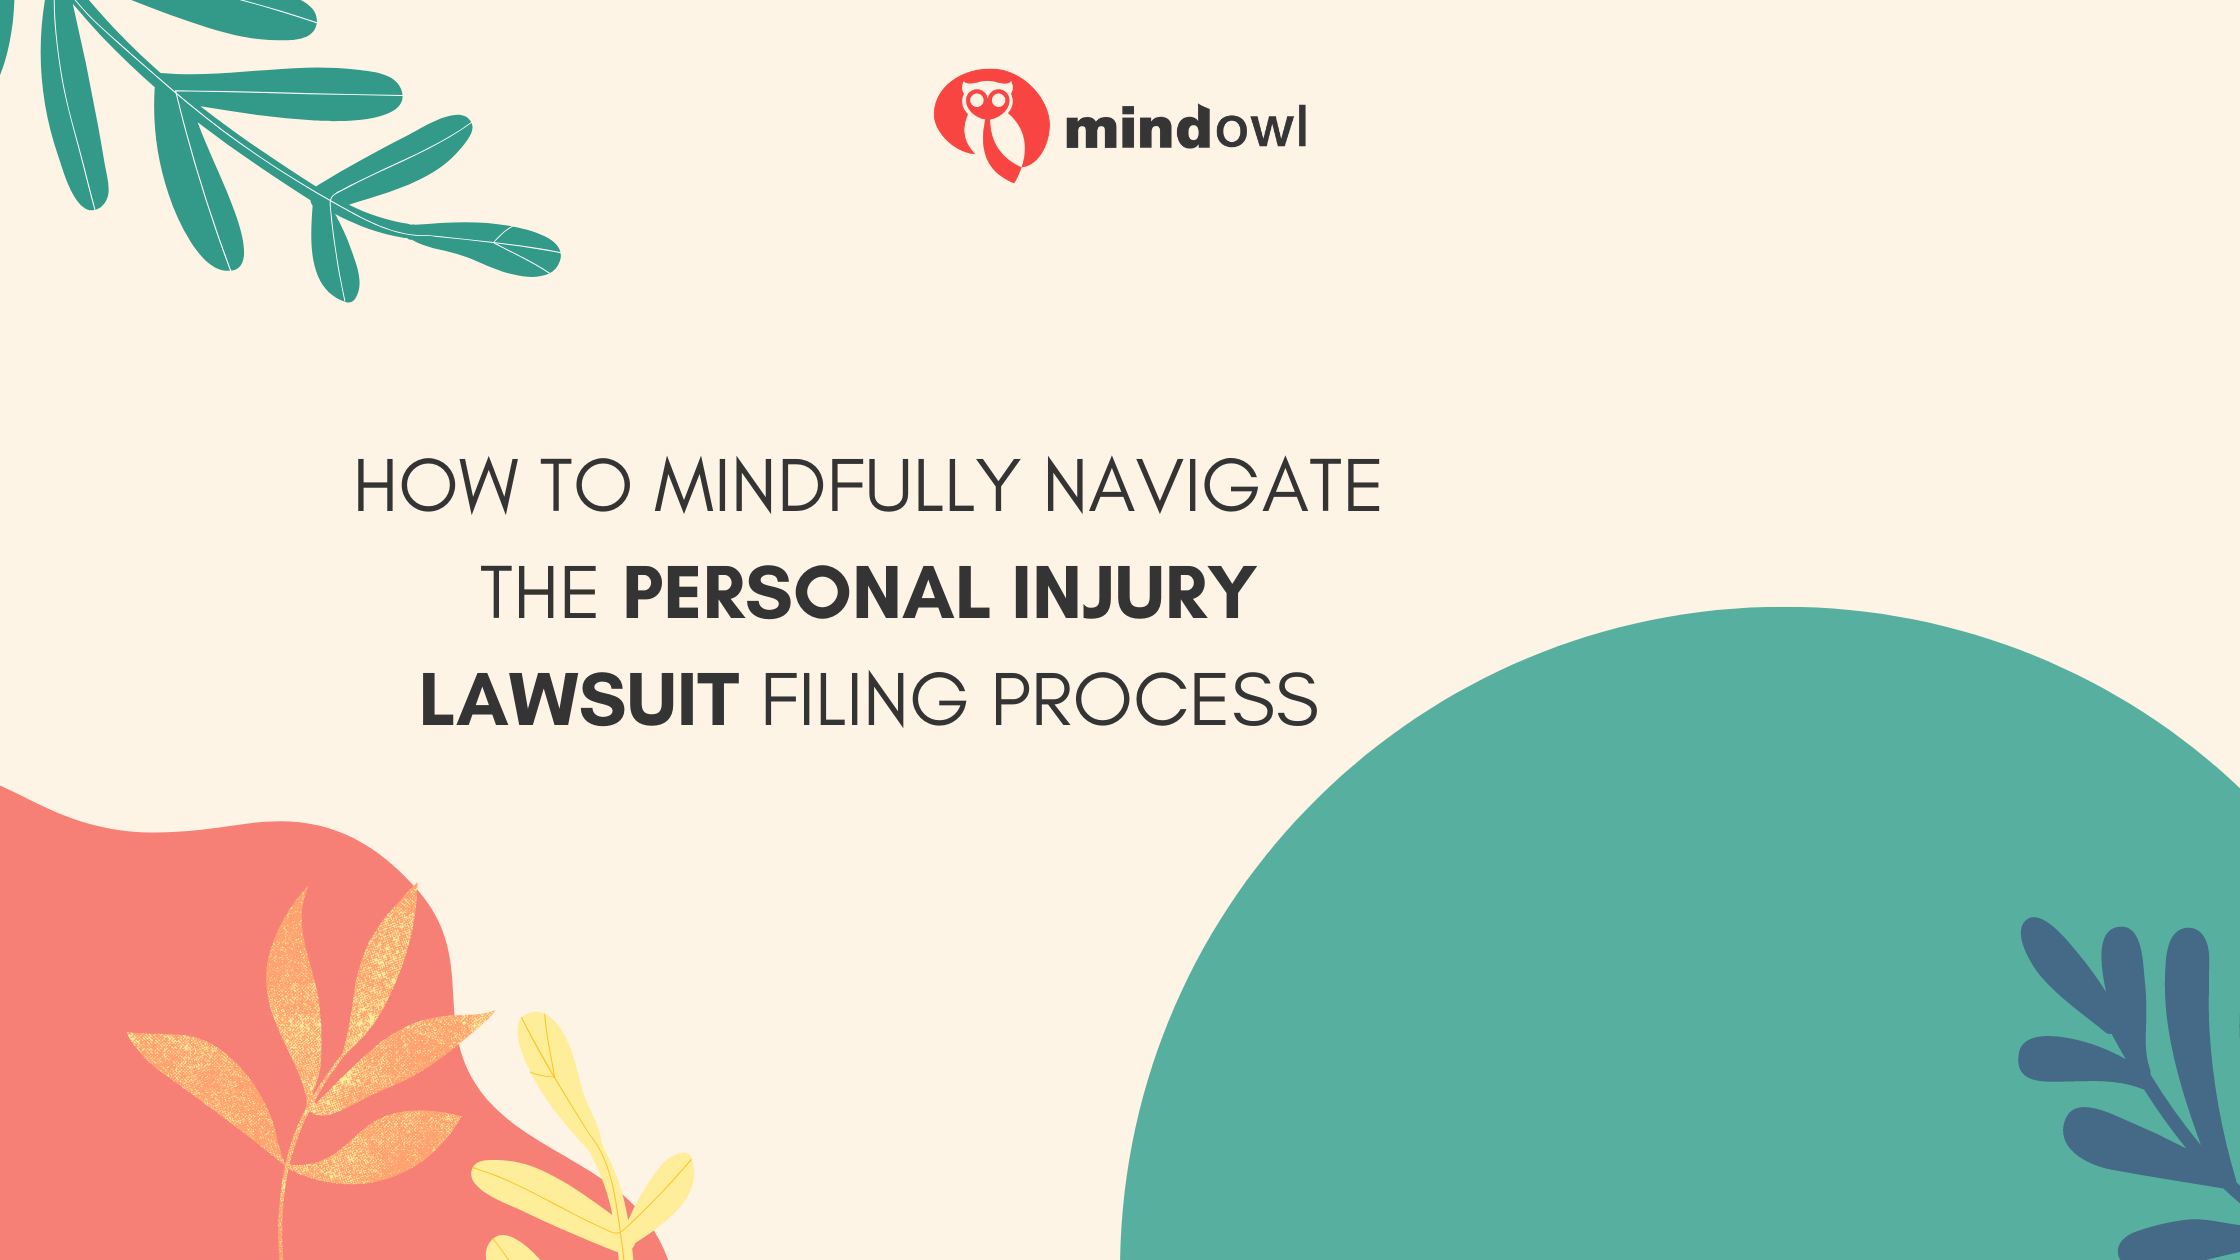 How to Mindfully Navigate the Personal Injury Lawsuit Filing Process